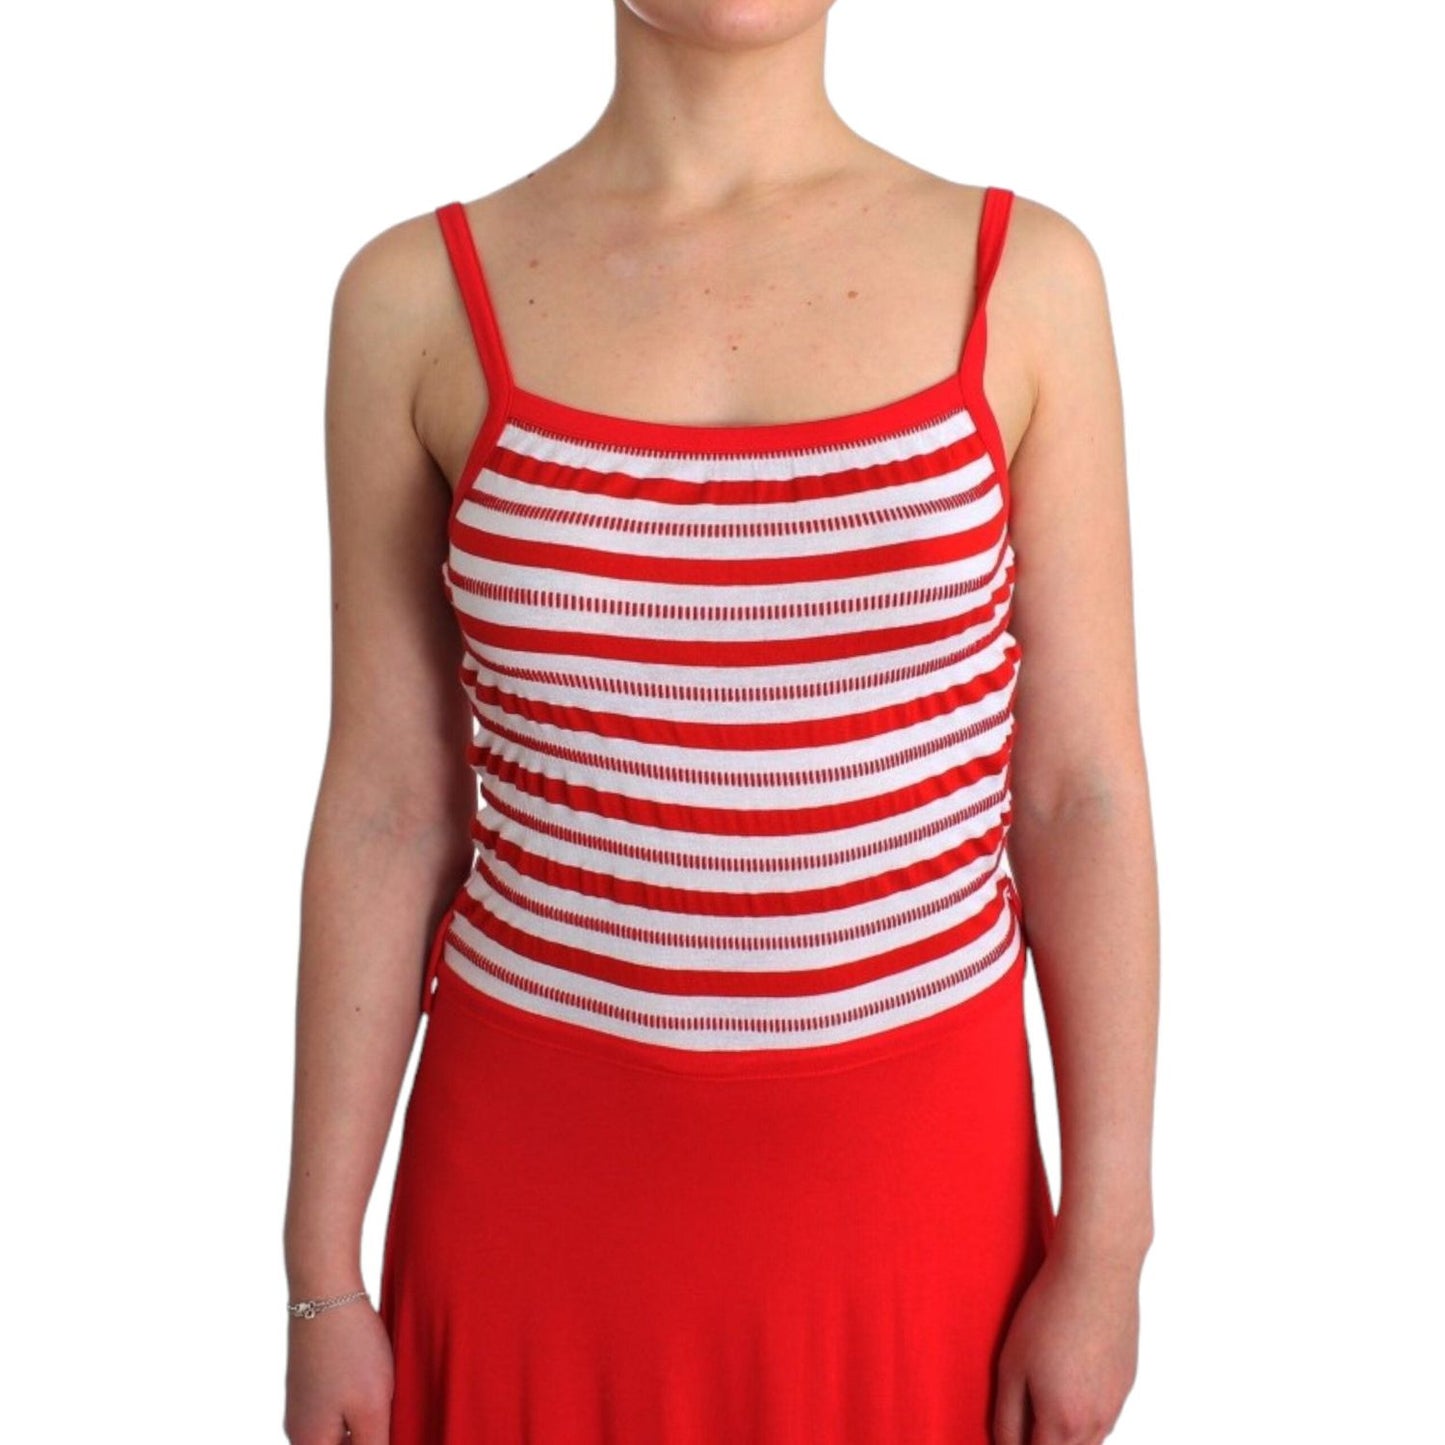 Roccobarocco Chic Audrey Jersey Line Knee-Length Dress red-striped-jersey-a-line-dress 2781-white-sheath-dress-4-scaled-92ae0b90-7c9.jpg